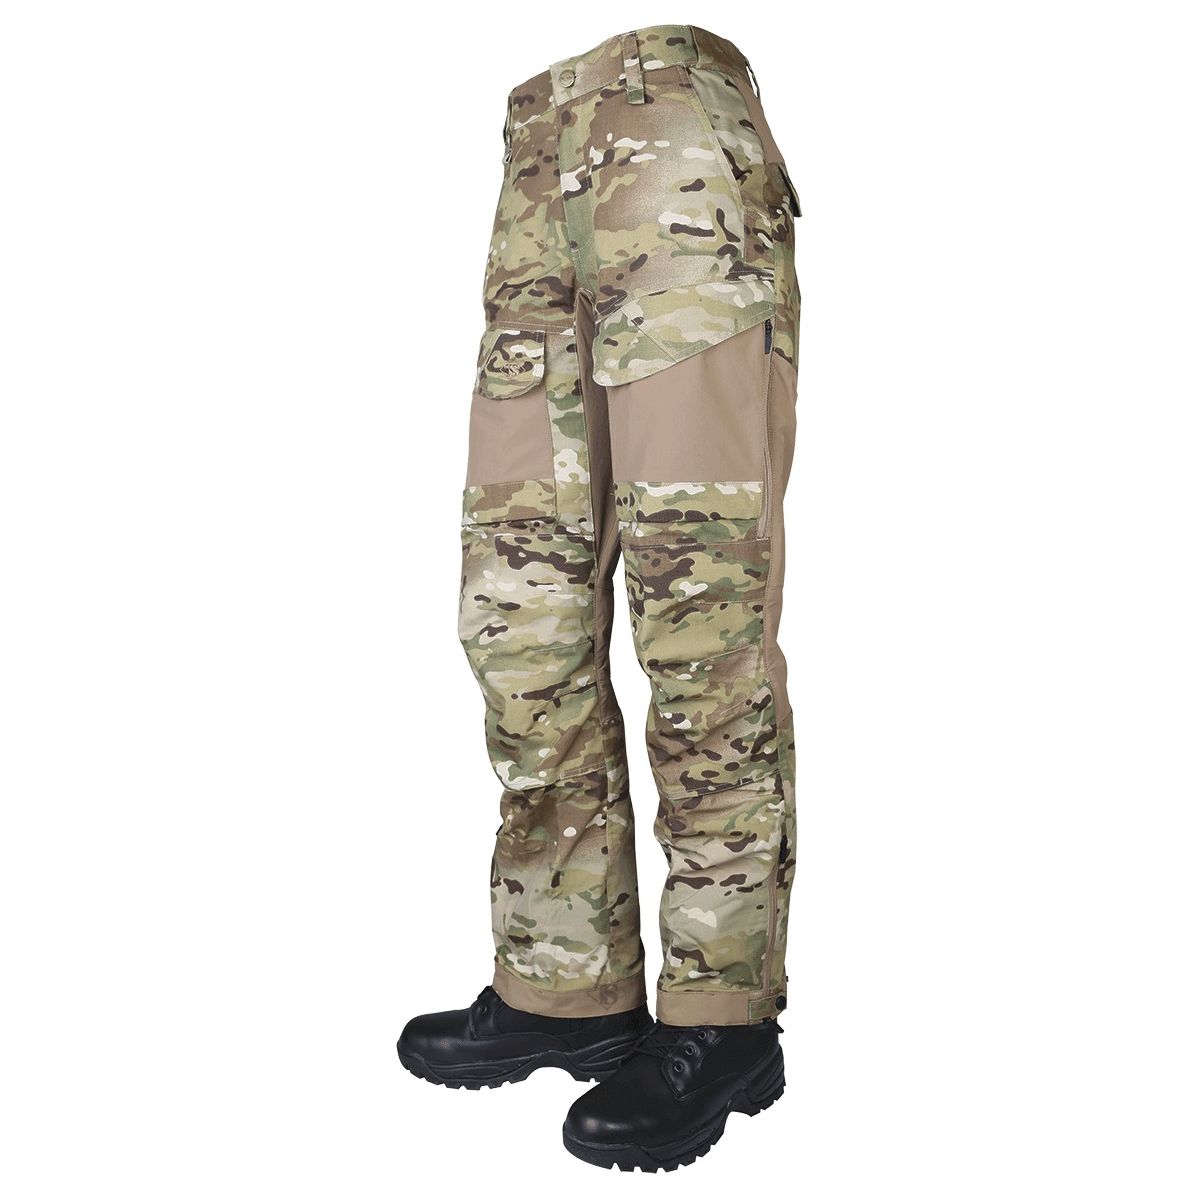 Kalhoty 24-7 XPEDITION MULTICAM®/COYOTE vel.30-30